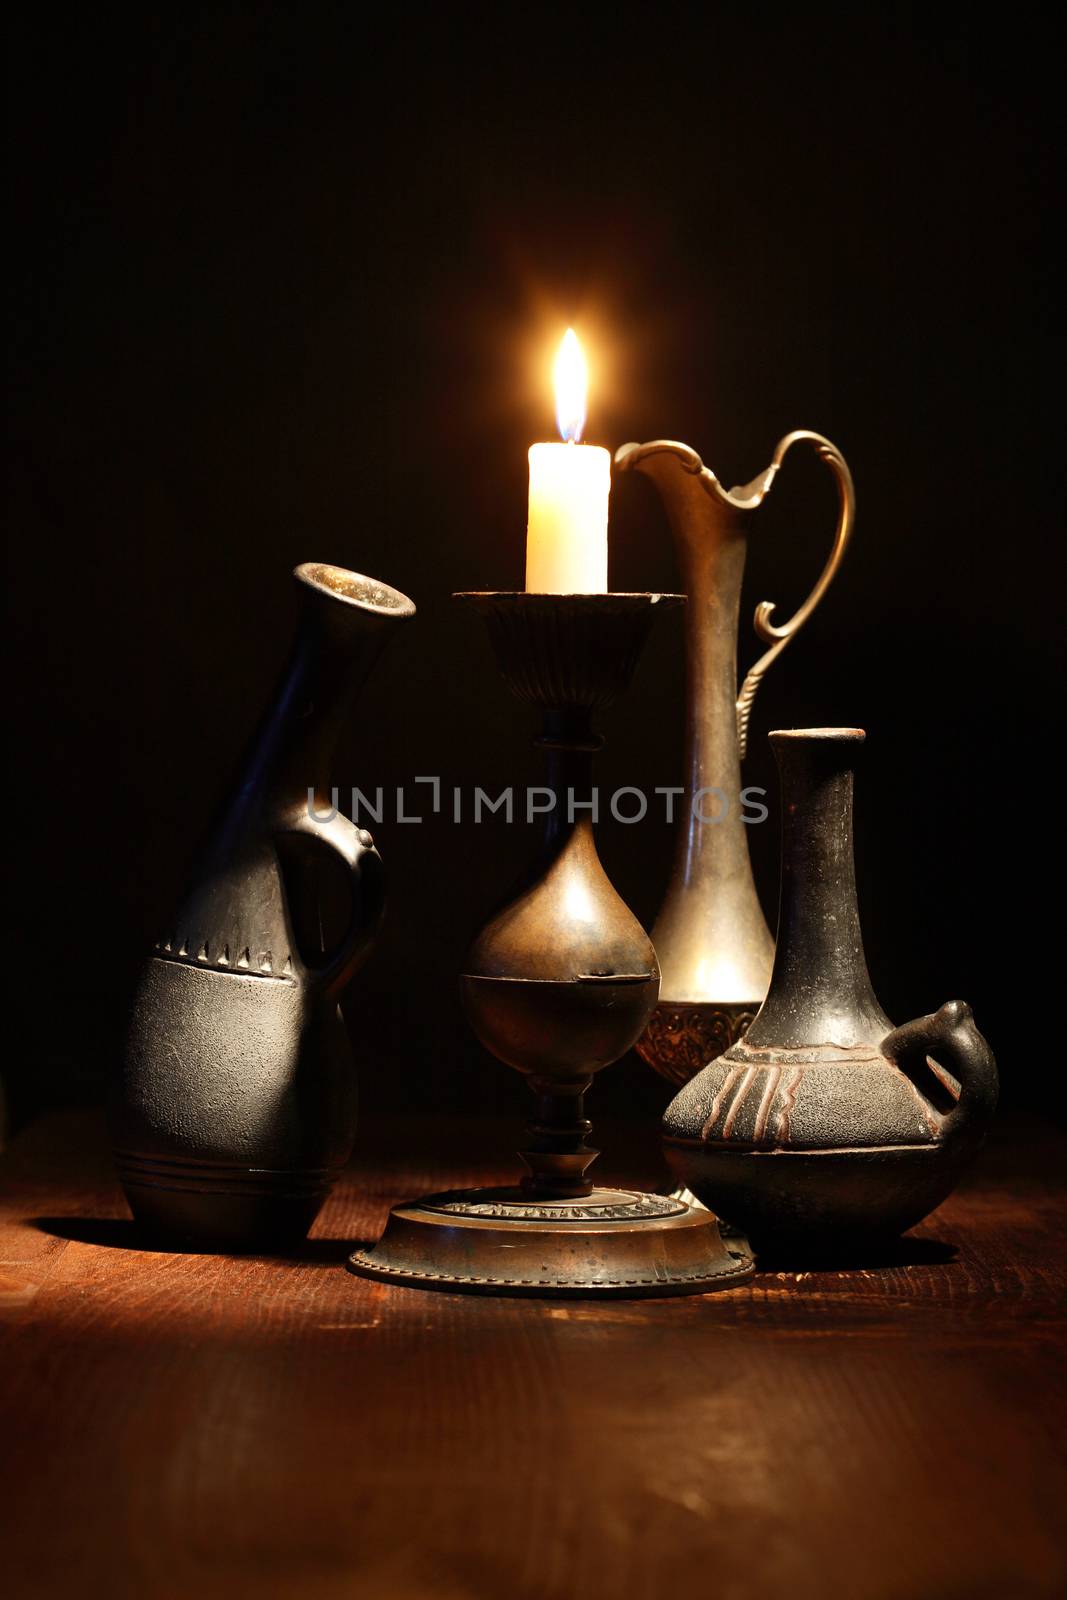 Ancient Vases And Candle by kvkirillov